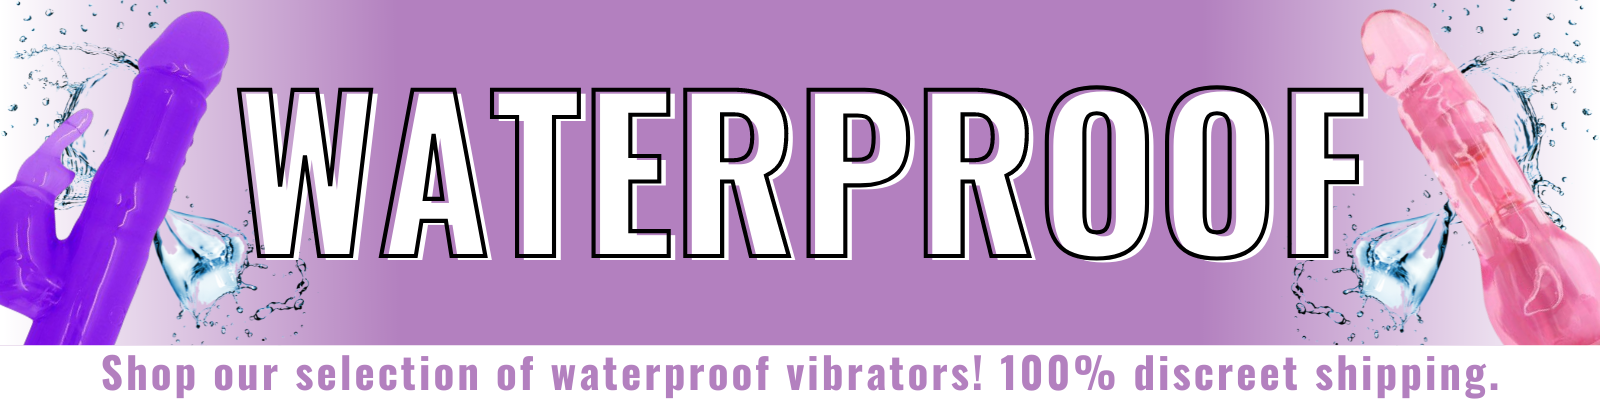 Banner for our waterproof vibrators collection. Banner reads: Waterproof. Shop our selection of waterproof vibrators today! 100% discreet shipping.